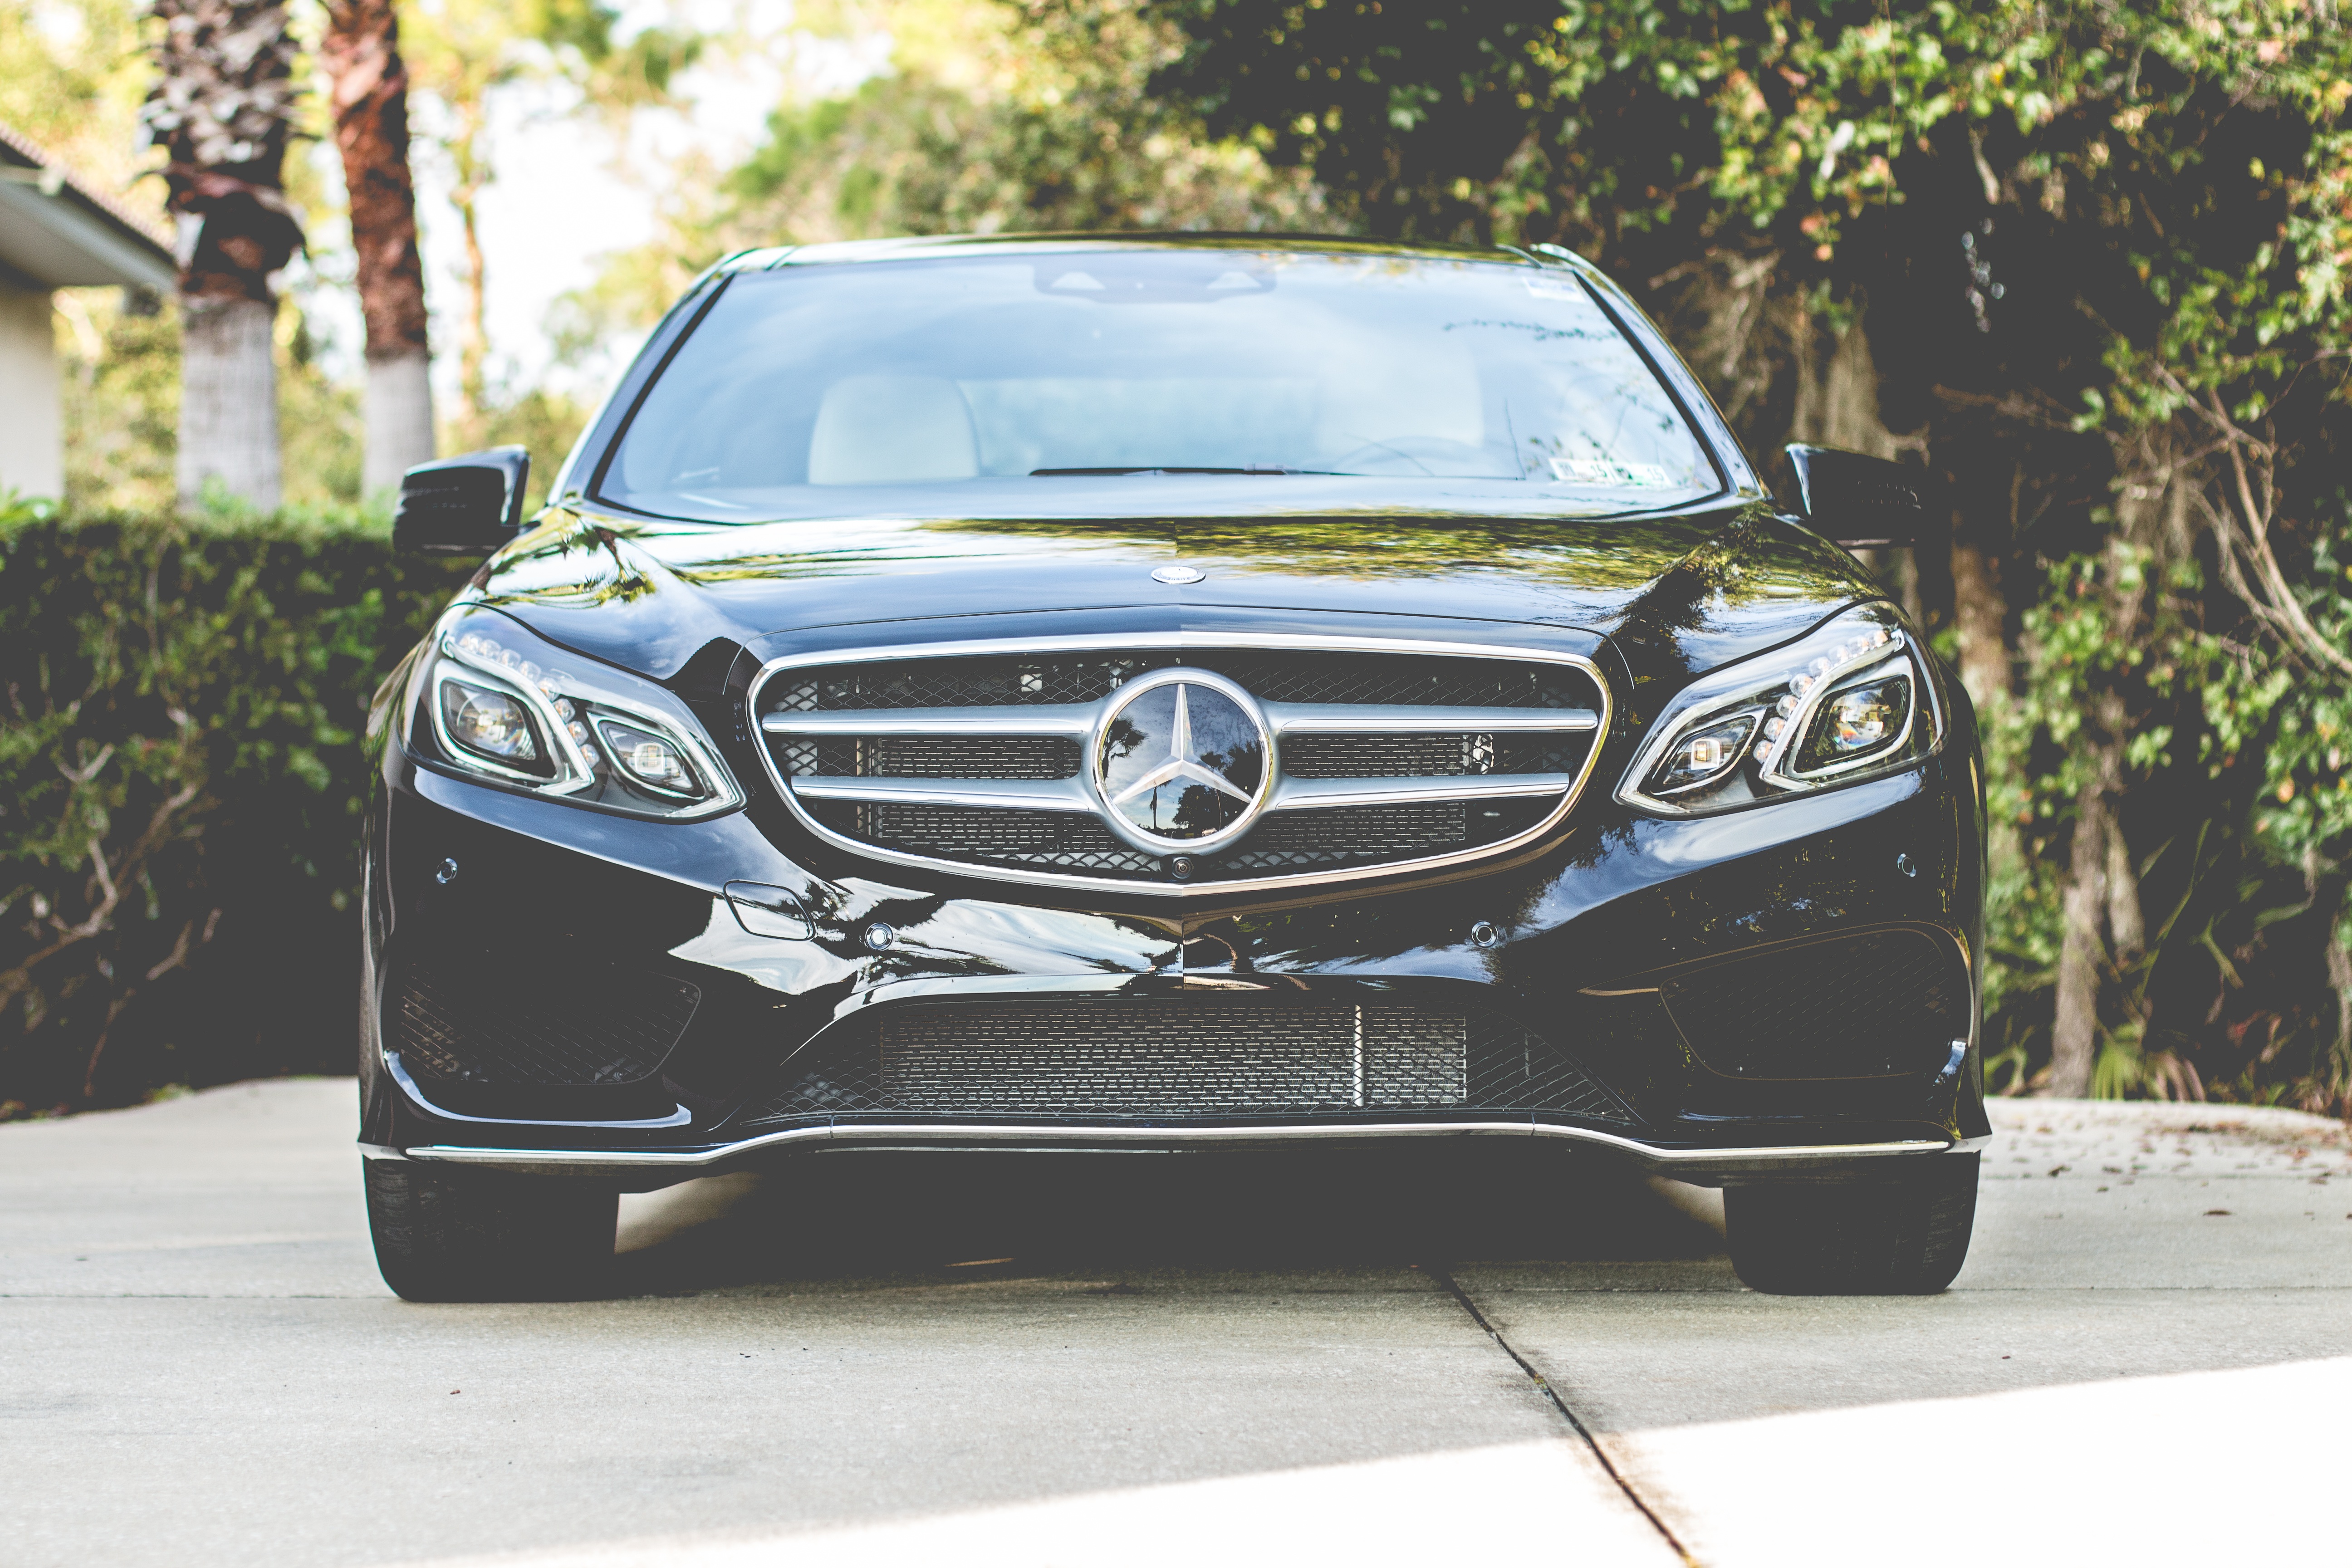 mercedes-benz, logo, cars, front view Ultrawide Wallpapers